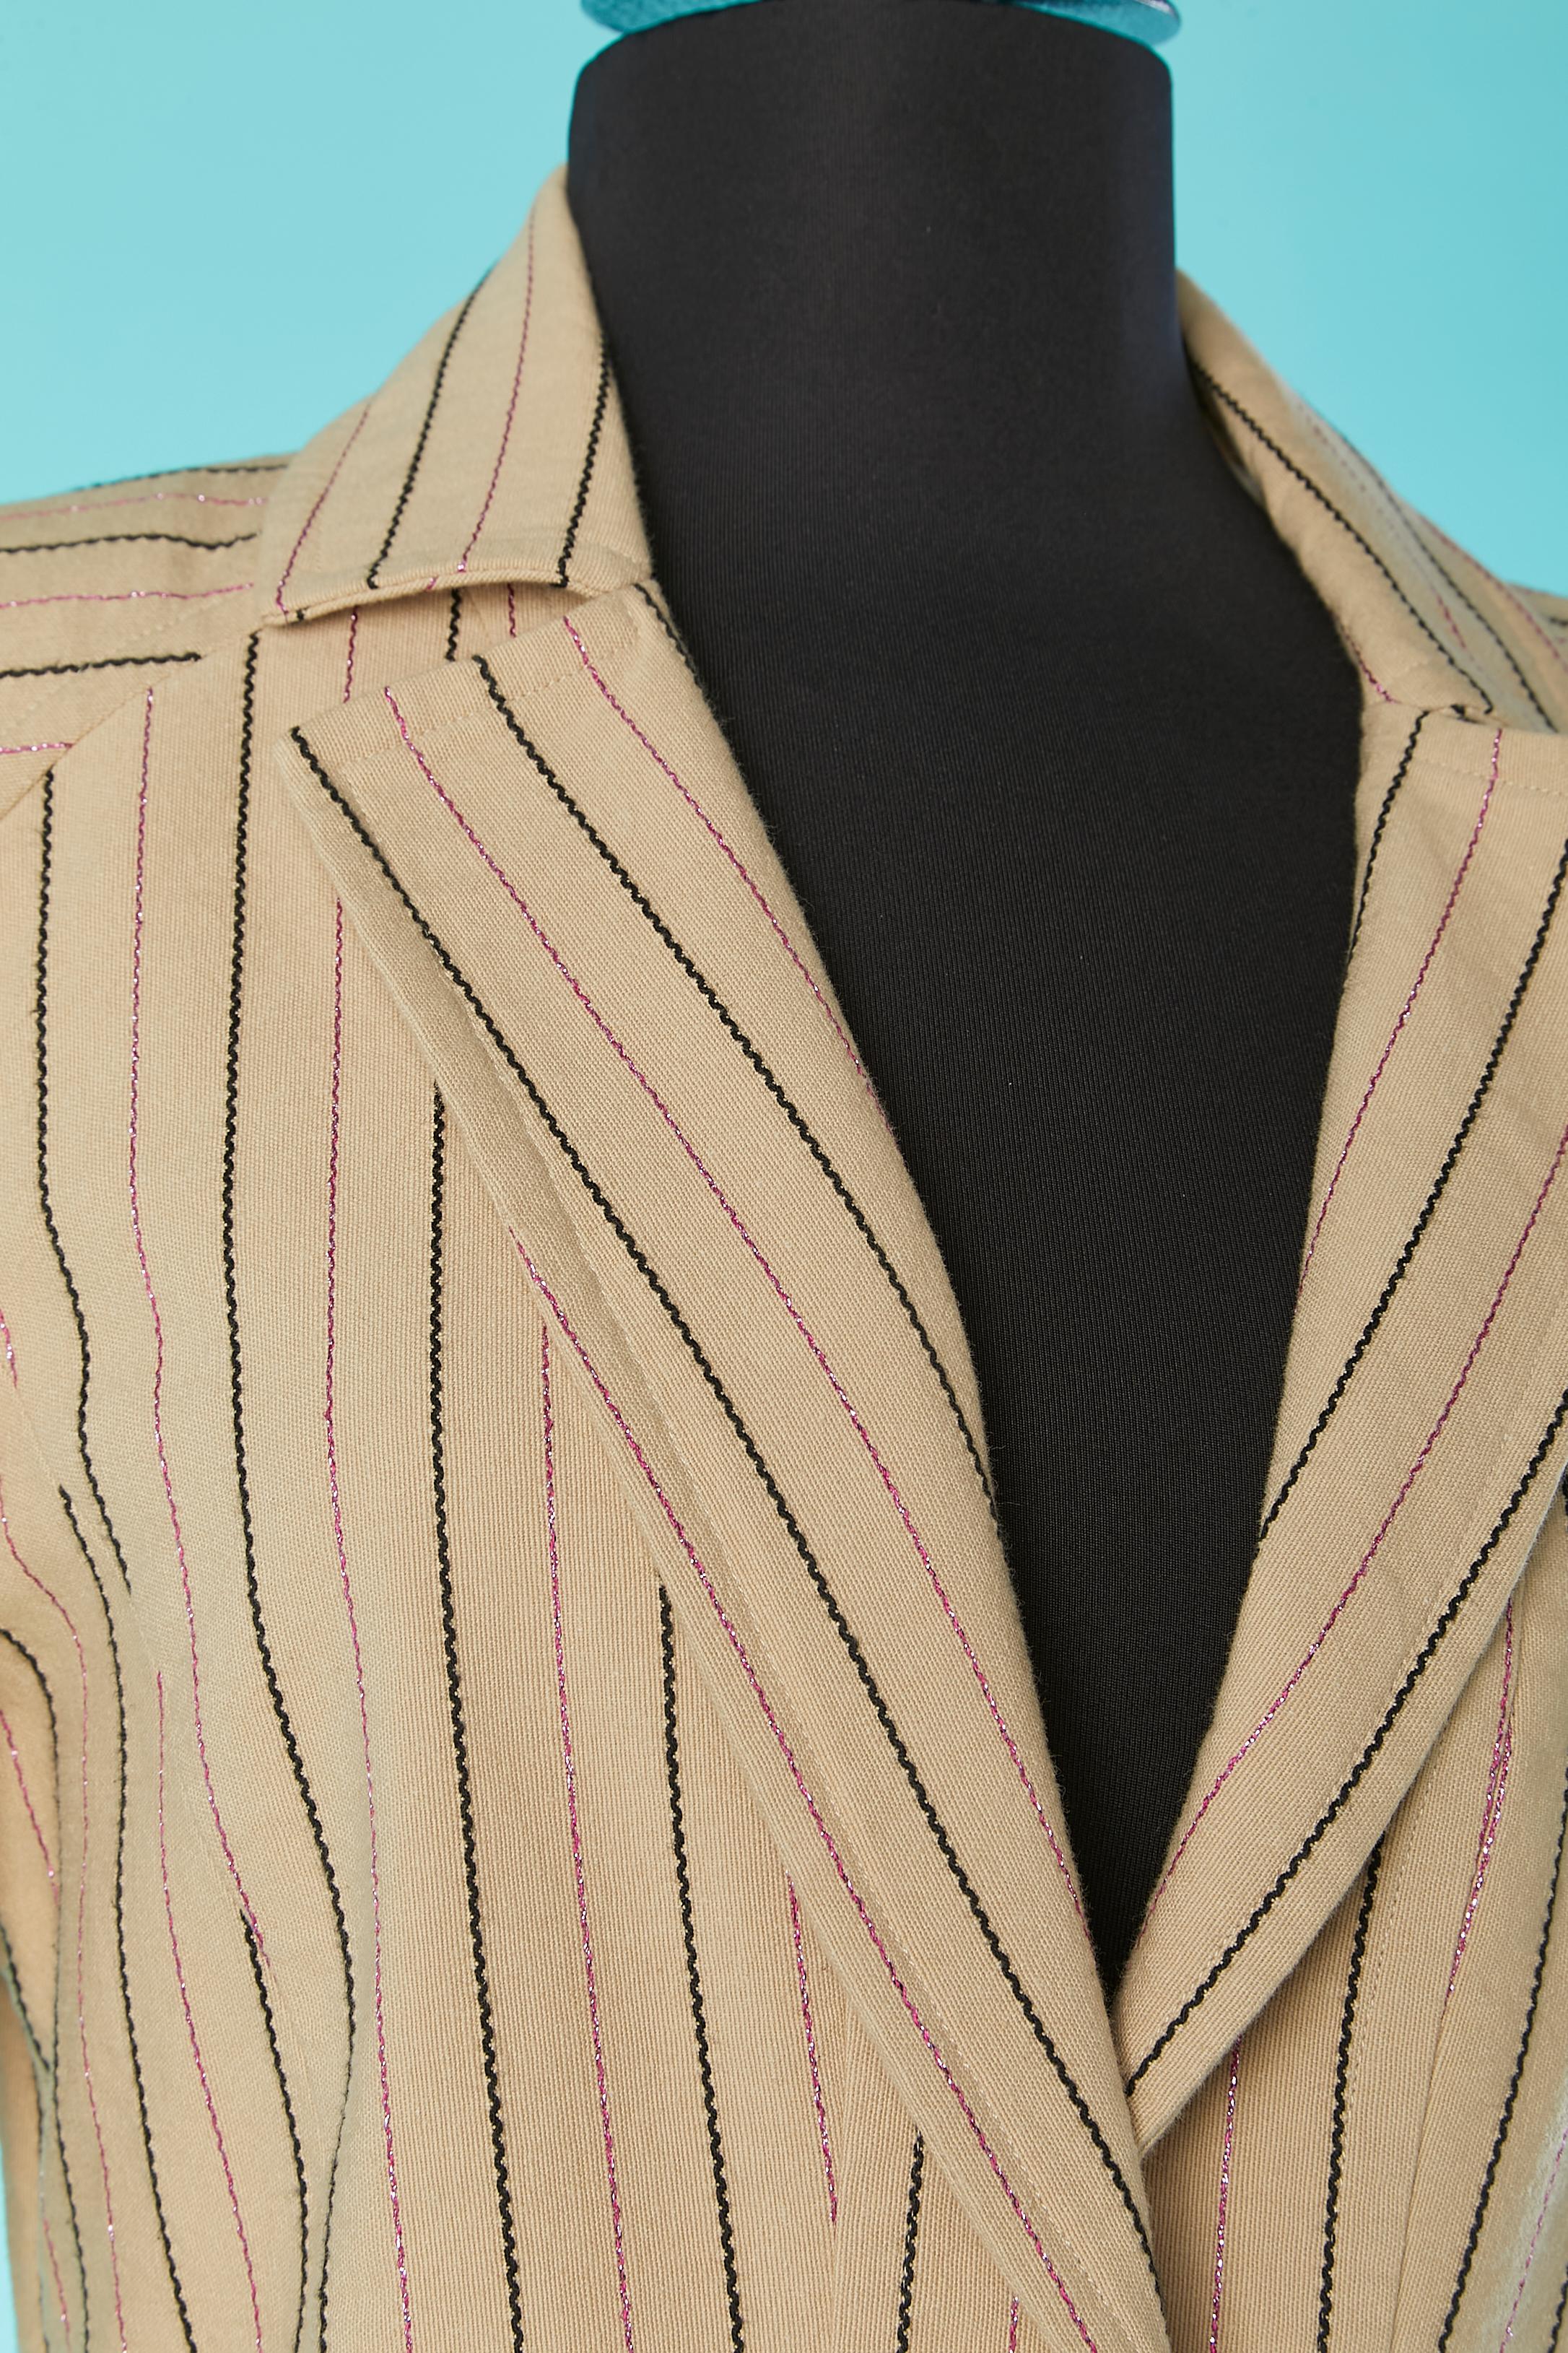 Black thread and pink lurex top-stitched striped single breasted blazer. Main fabric composition: 98% cotton, 2% polyester. Lining: 67% polyester, 33% cotton. Sleeves lining: 58% acetate, 42% rayon. Mother-of-shell's button.
SIZE 40 (Fr) 10 (US) 